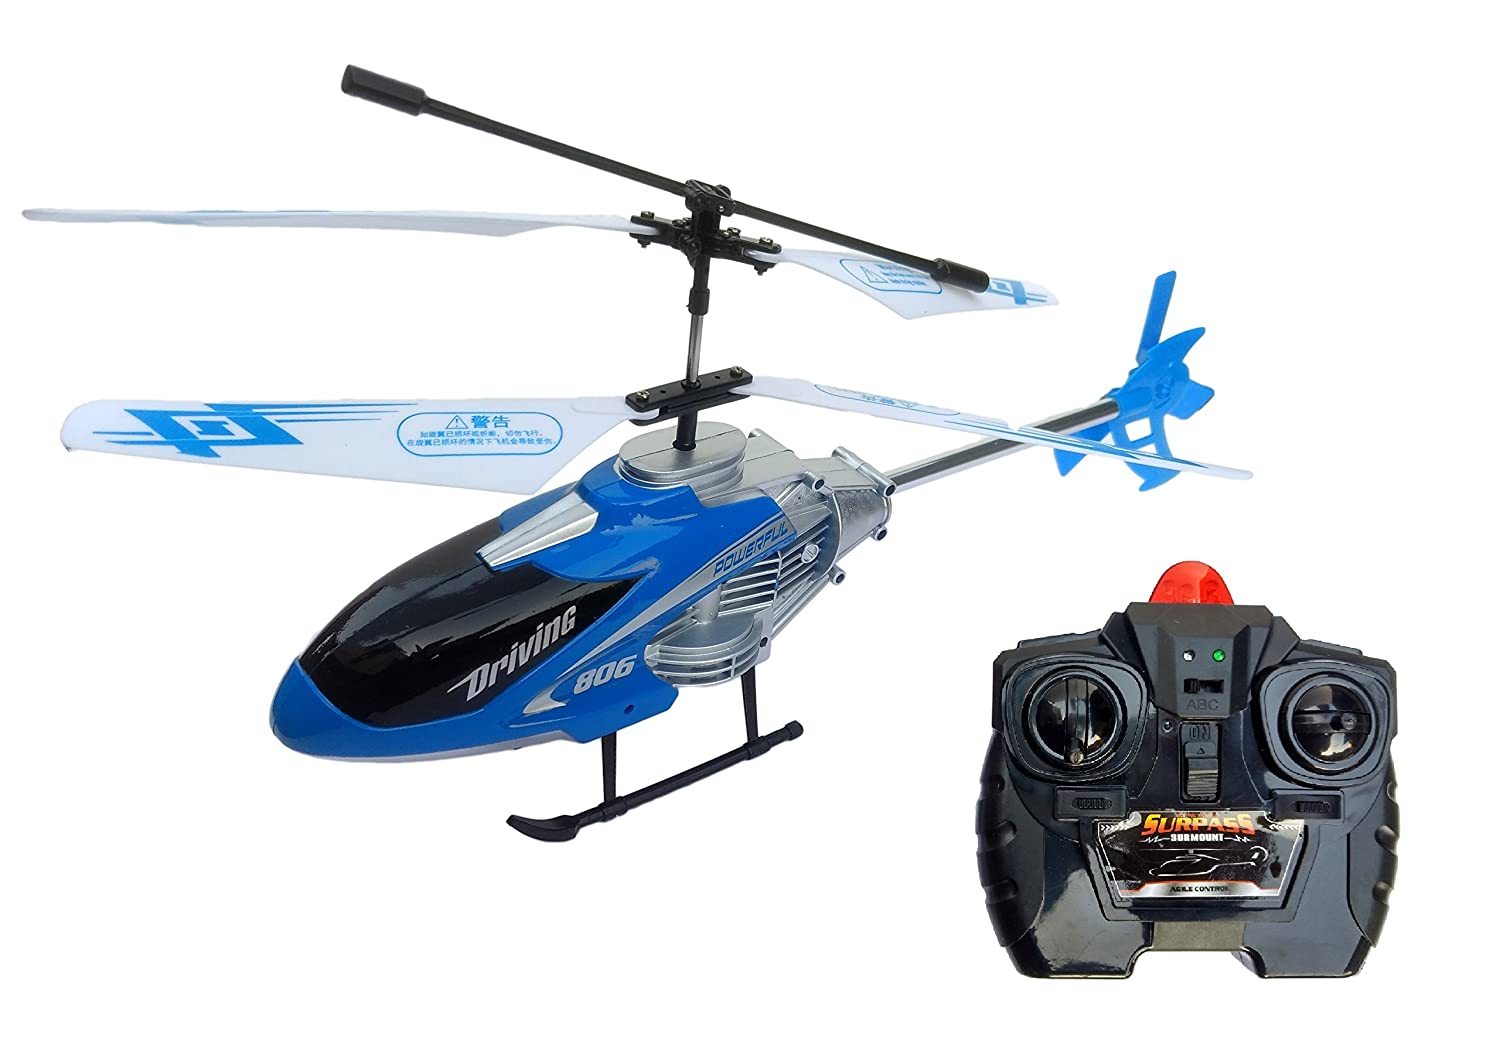 Buy VELOCITY Remote control High Speed Helicopter Online @ ₹1499 from ...